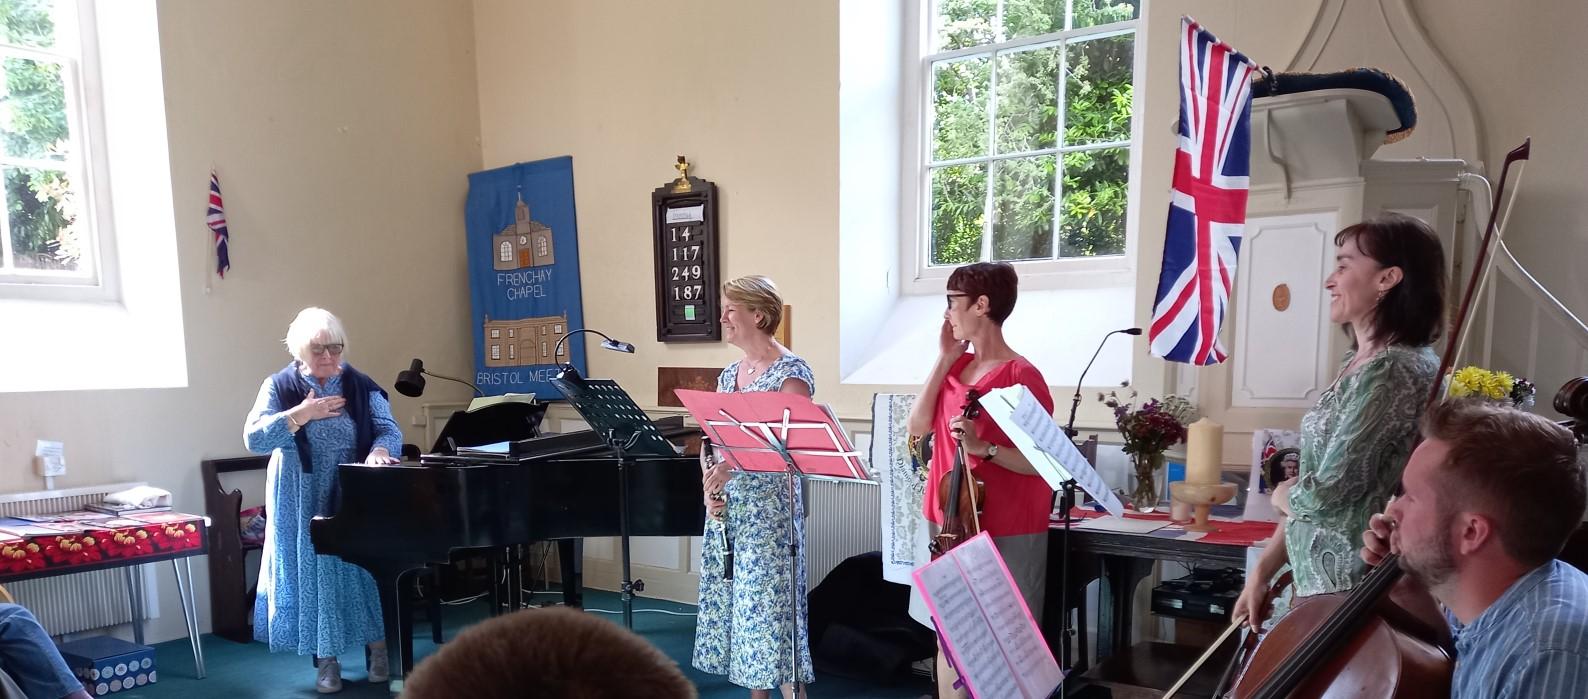 Frenchay Foxes and Church Choirs